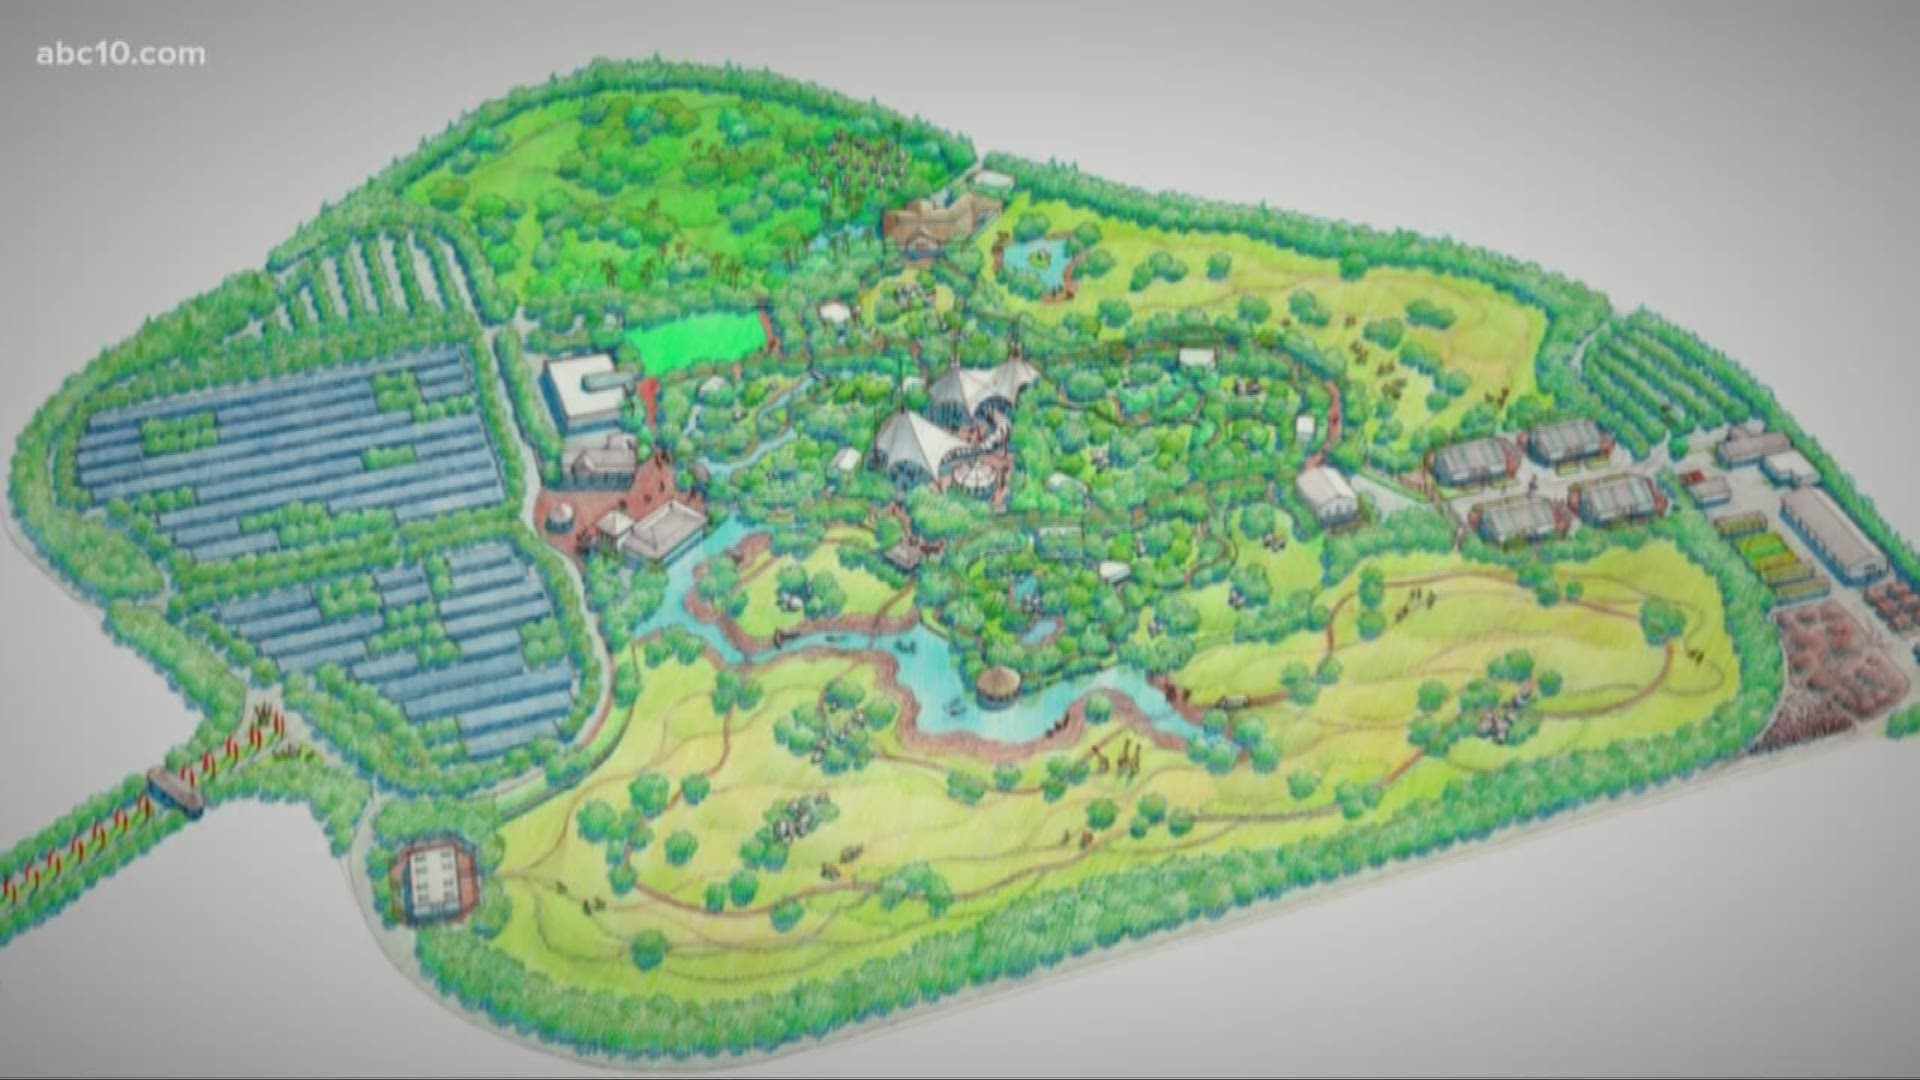 Sacramento Zoo Executive Director and CEO Jason Jacobs told ABC10 he is exploring the idea of moving the zoo from its longtime Land Park location to the Sleep Train Arena in Natomas.